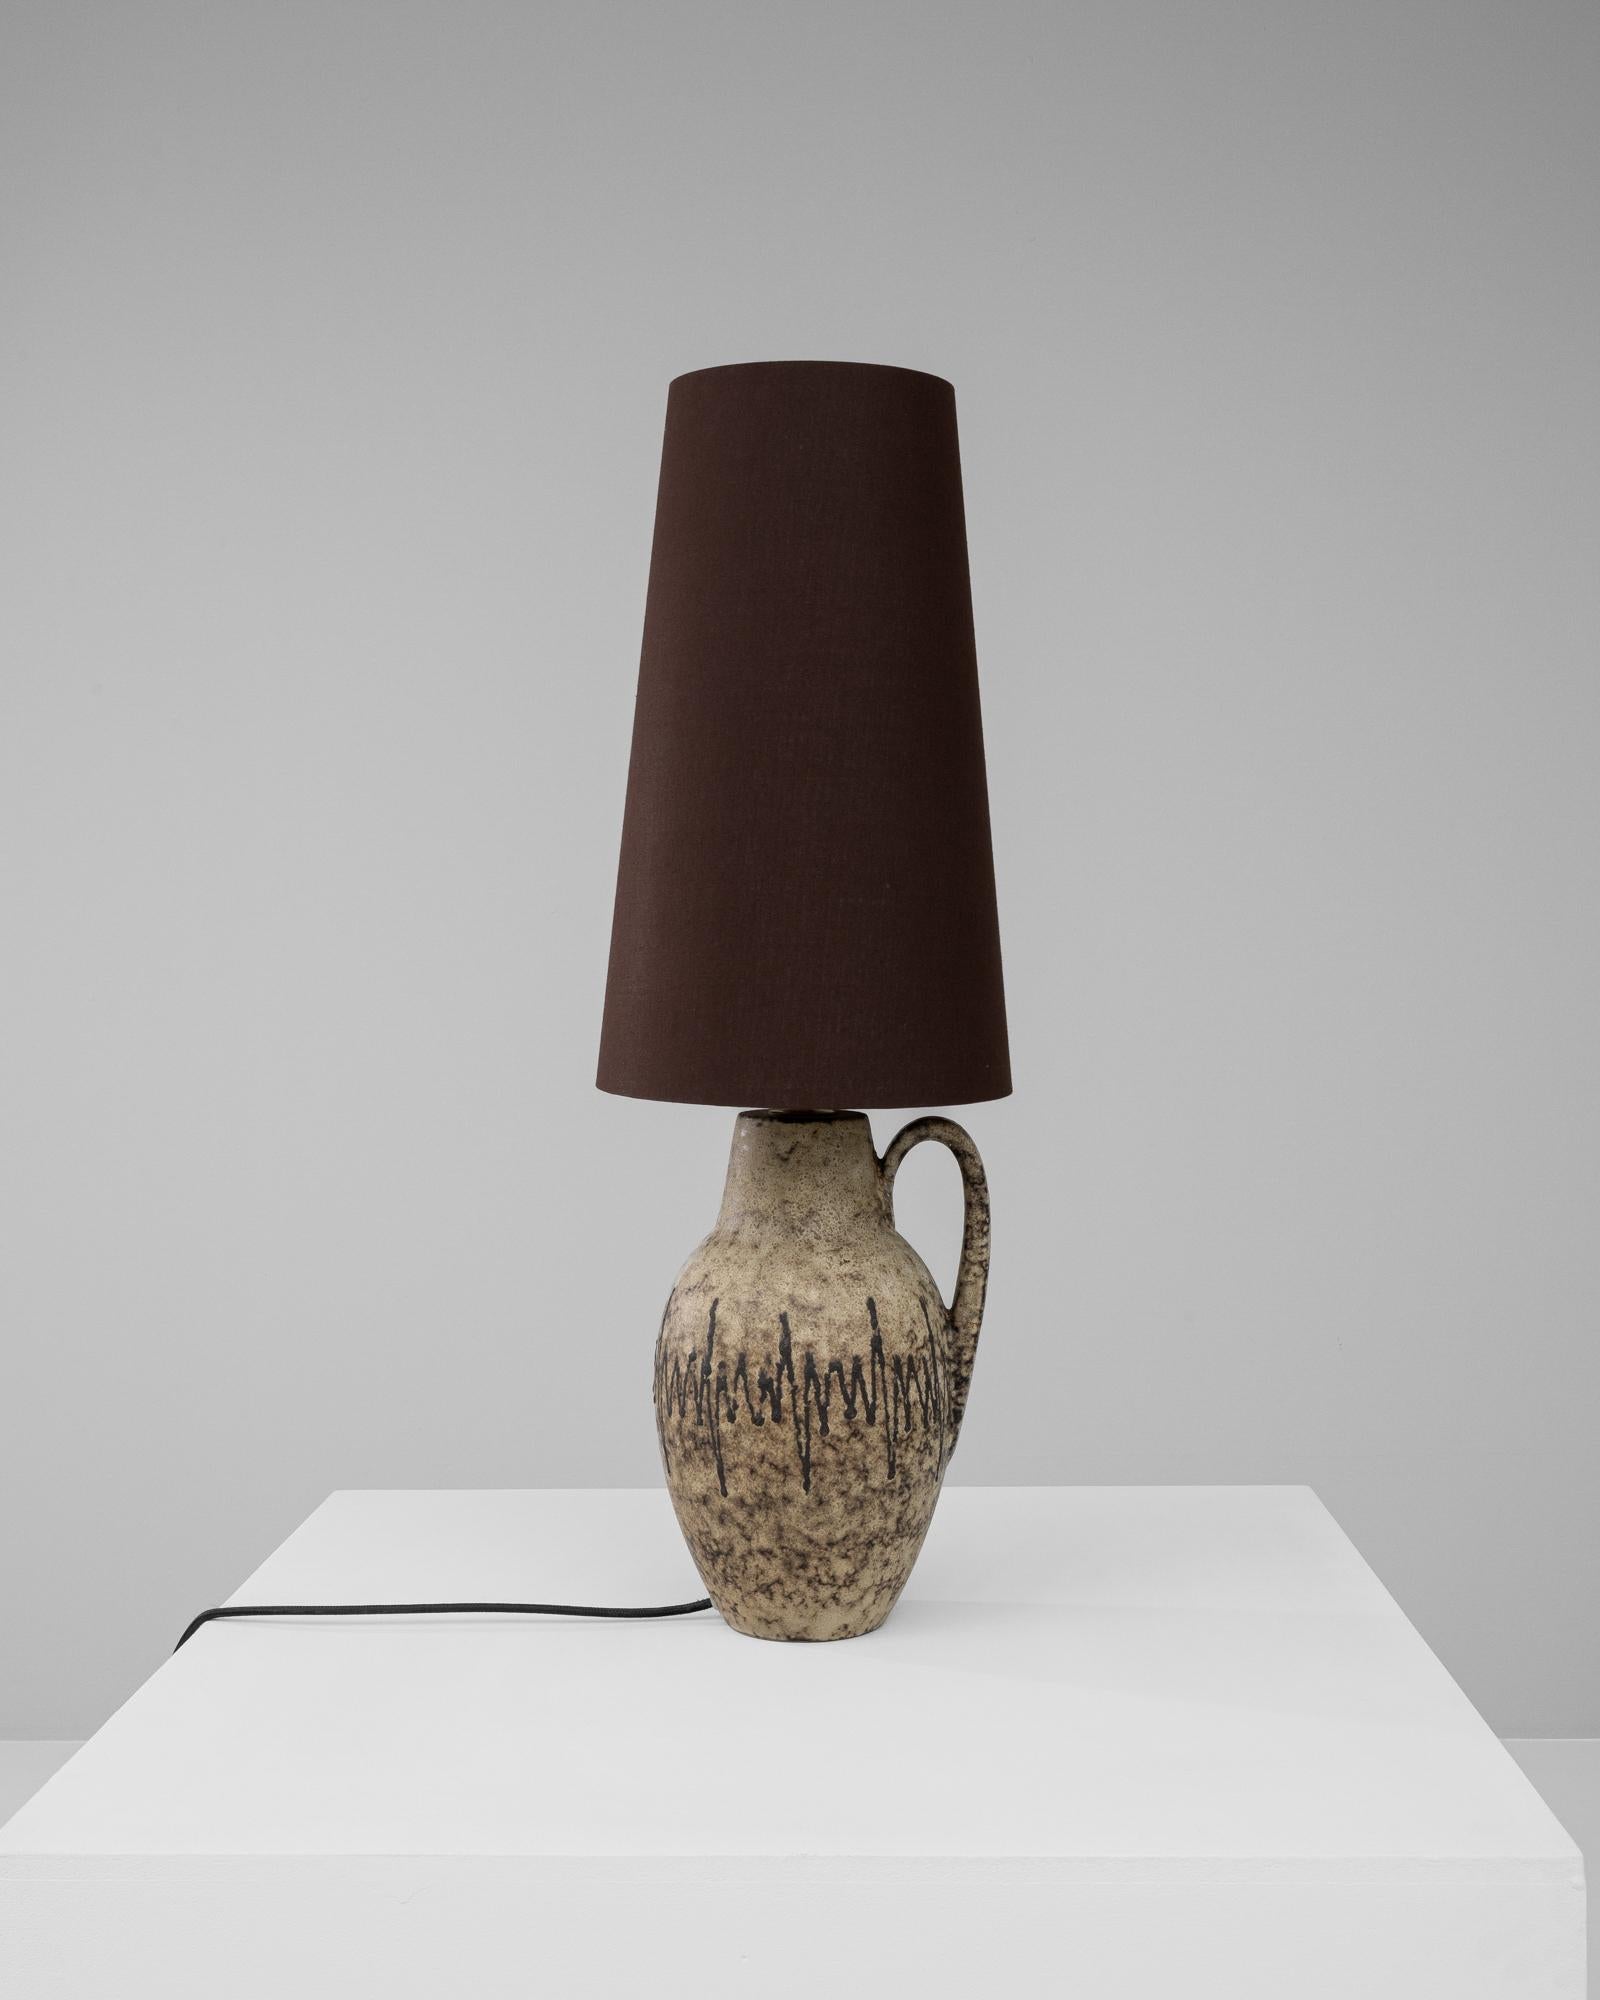 This 20th Century German Ceramic Table Lamp embodies a rustic yet enchanting aesthetic, perfect for those who appreciate the allure of time-honored craftsmanship. The lamp's base, shaped like a classic earthenware jug, features a raw, sandy texture